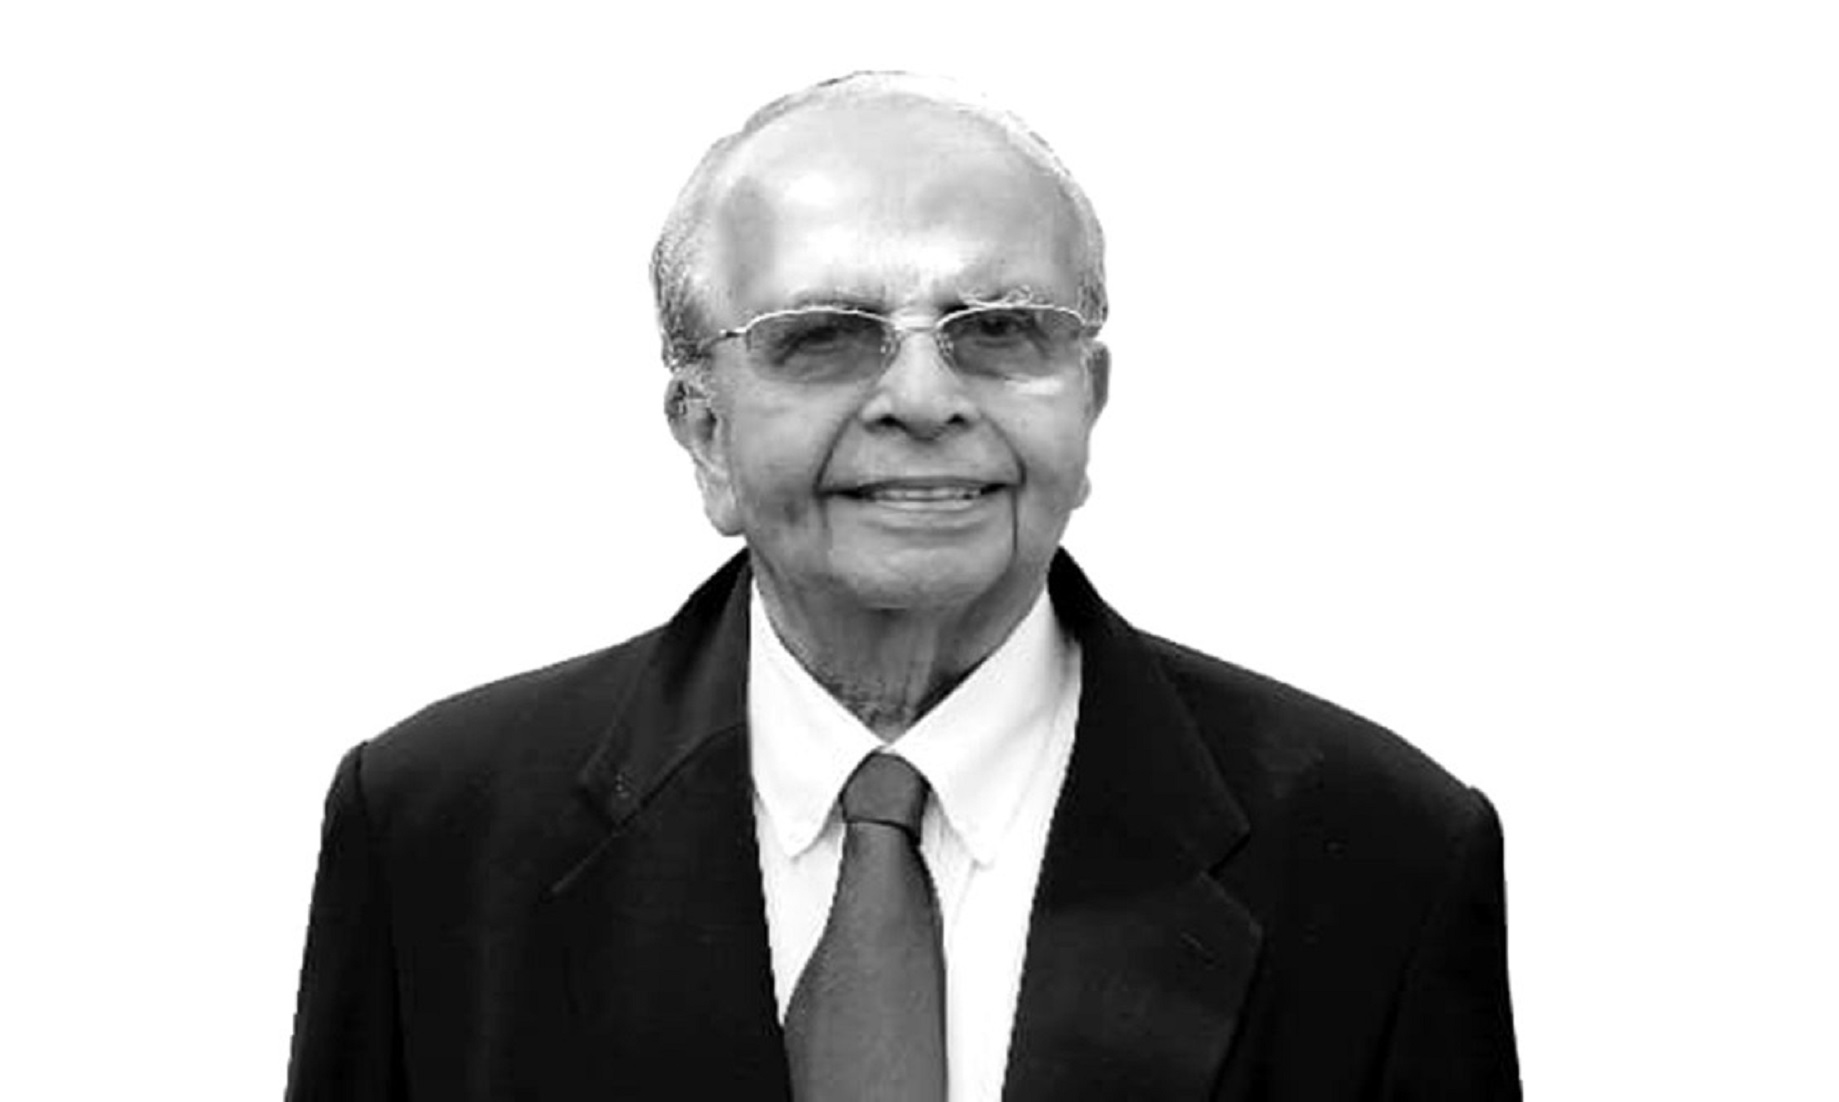 Malaysia Airlines first chairman Rama Iyer dies